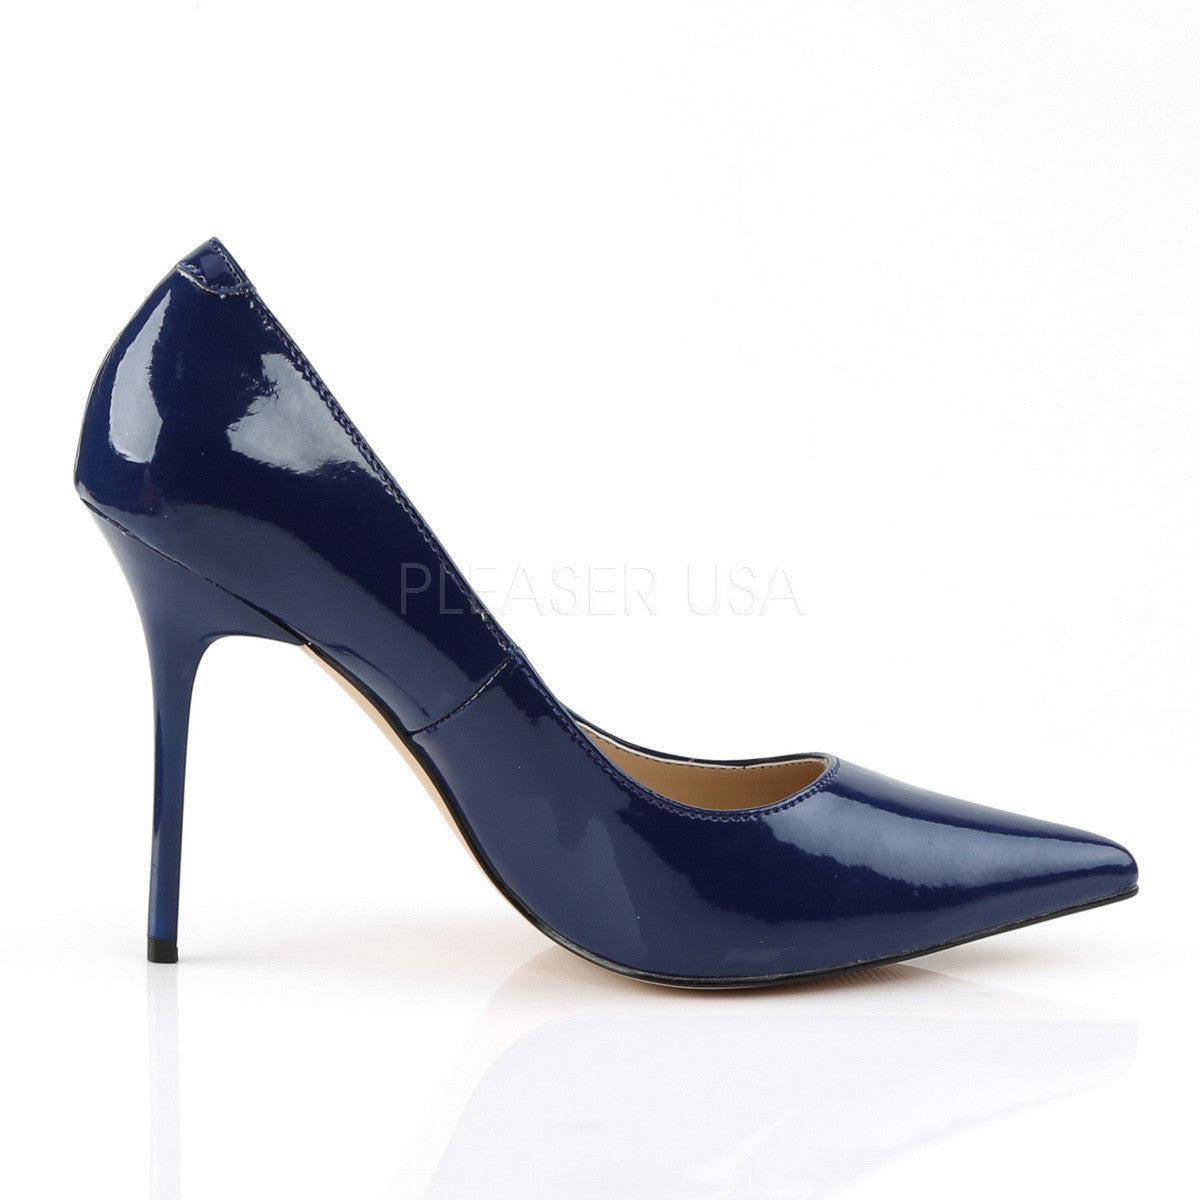 Pleaser CLAS20-NB-9 Womens Pointed-Toe Pump Heel - Navy Blue Patent - Size 9